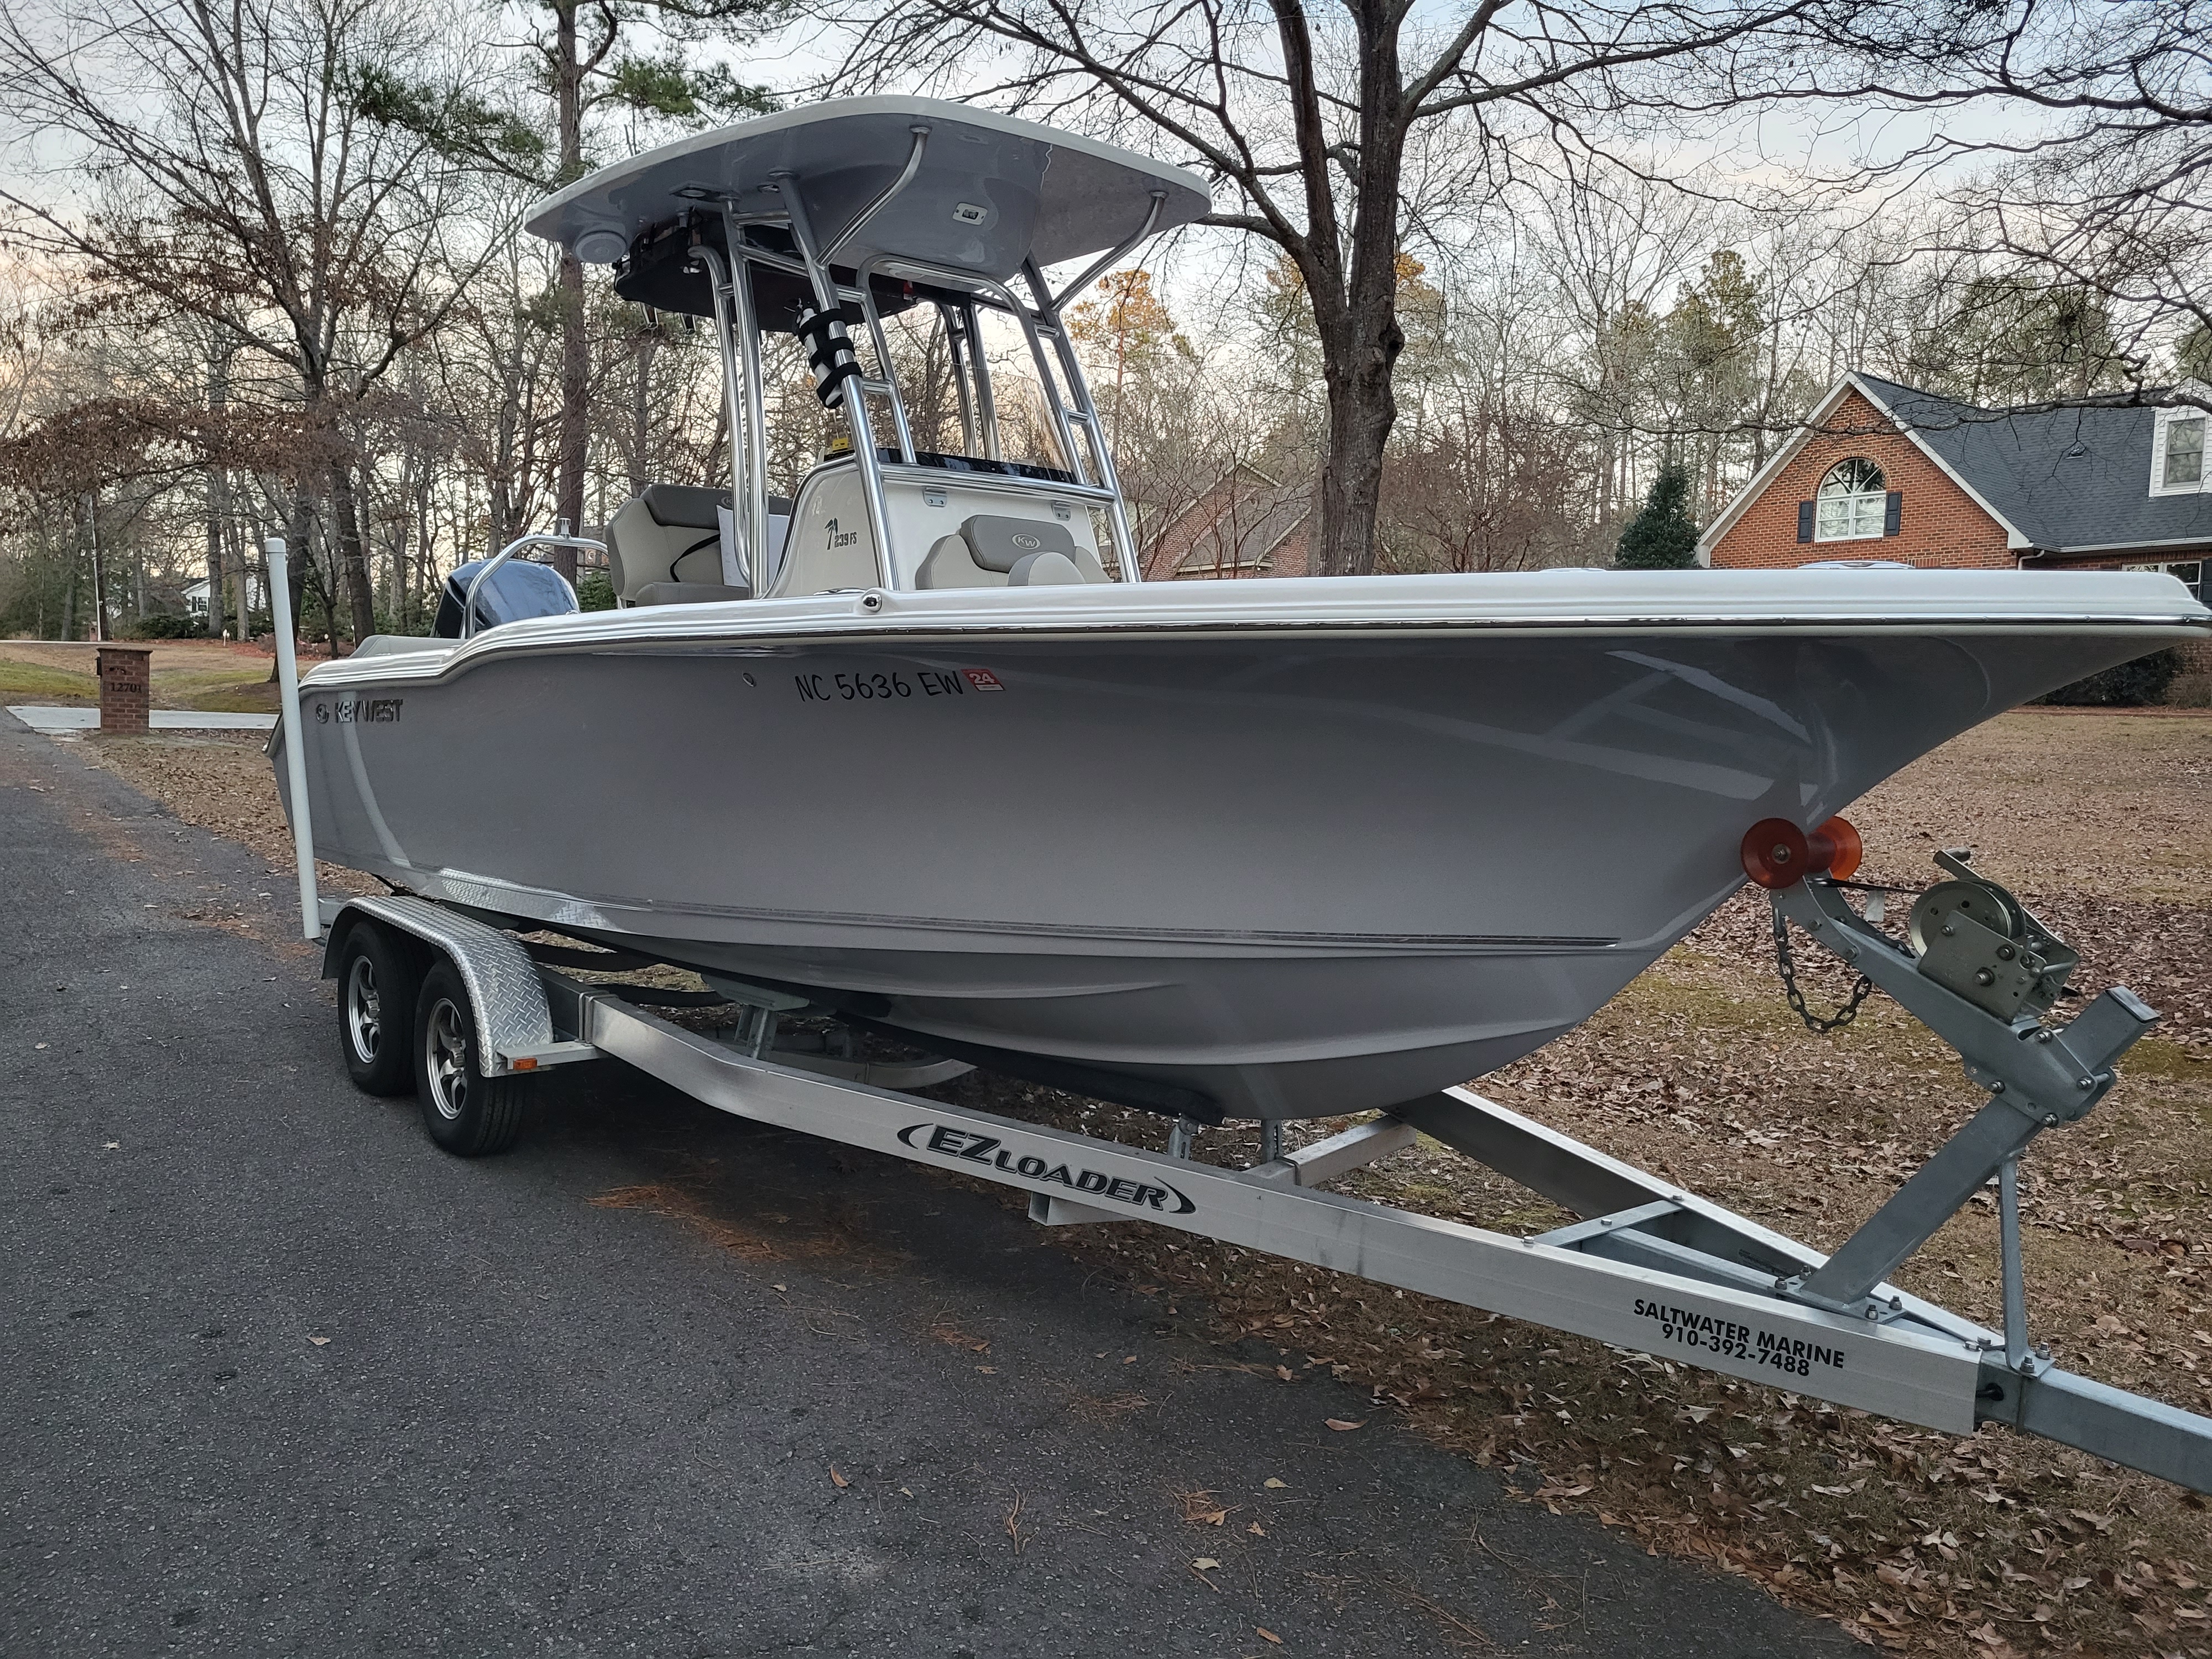 2022 Key West 239FS Power boat for sale in Laurinburg, NC - image 3 